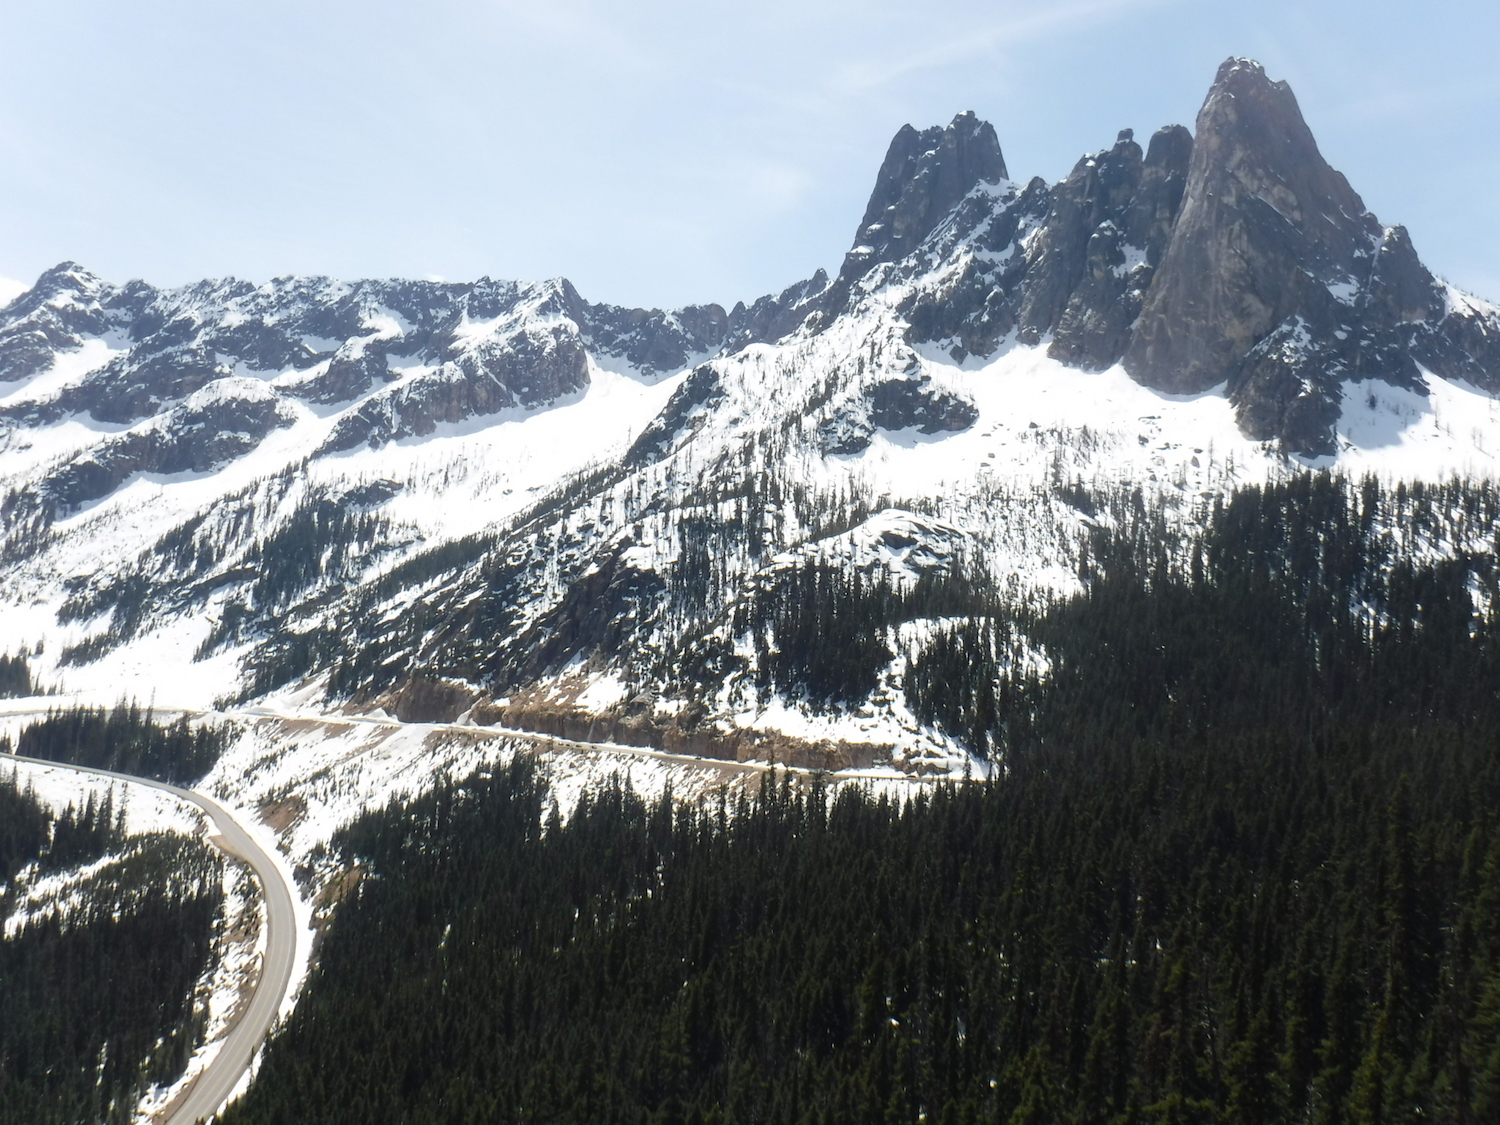 The last switchback before the pass